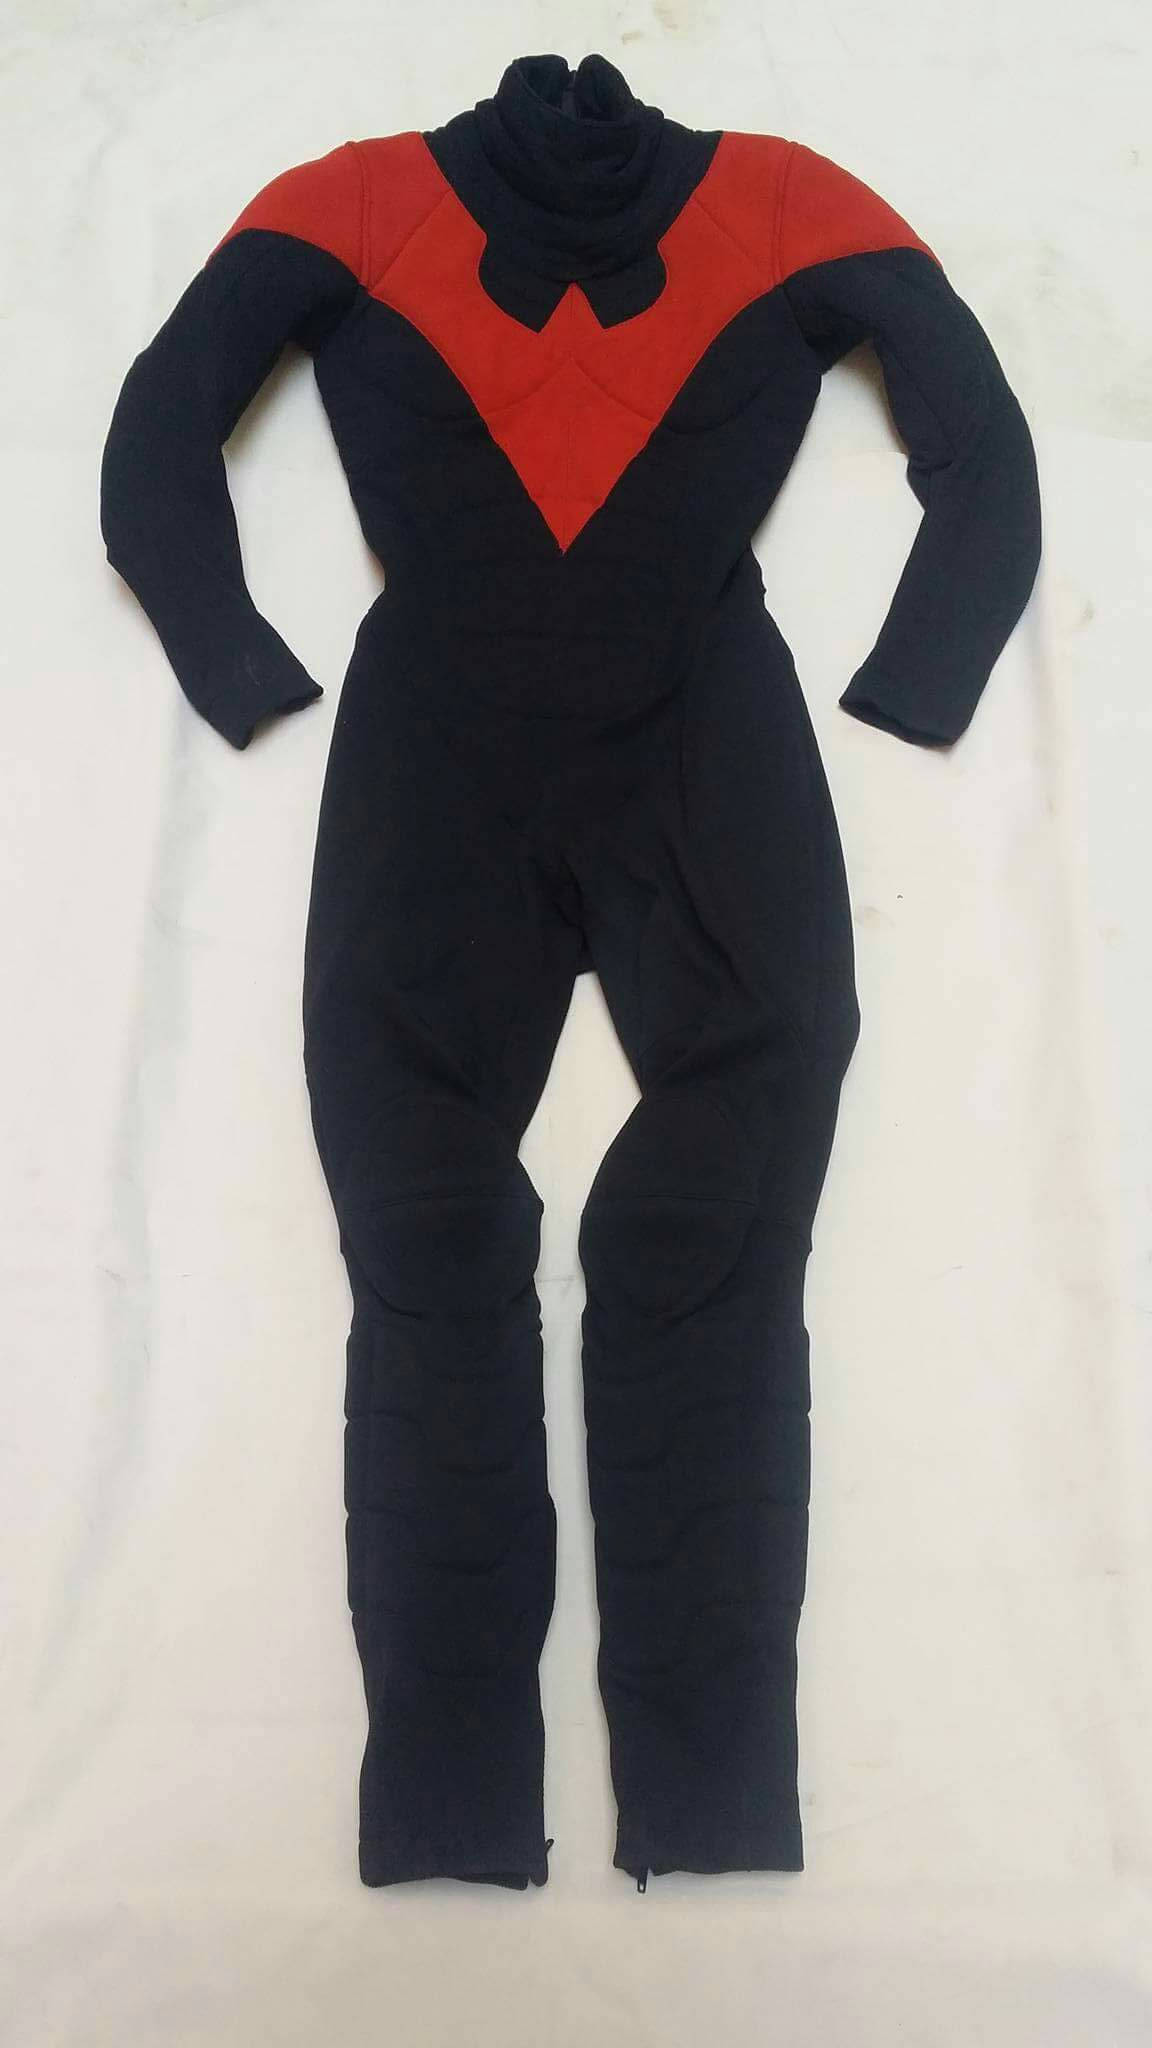 Nightwing Costume DIY
 Replica Nightwing Suit Costume Cosplay Red or Blue